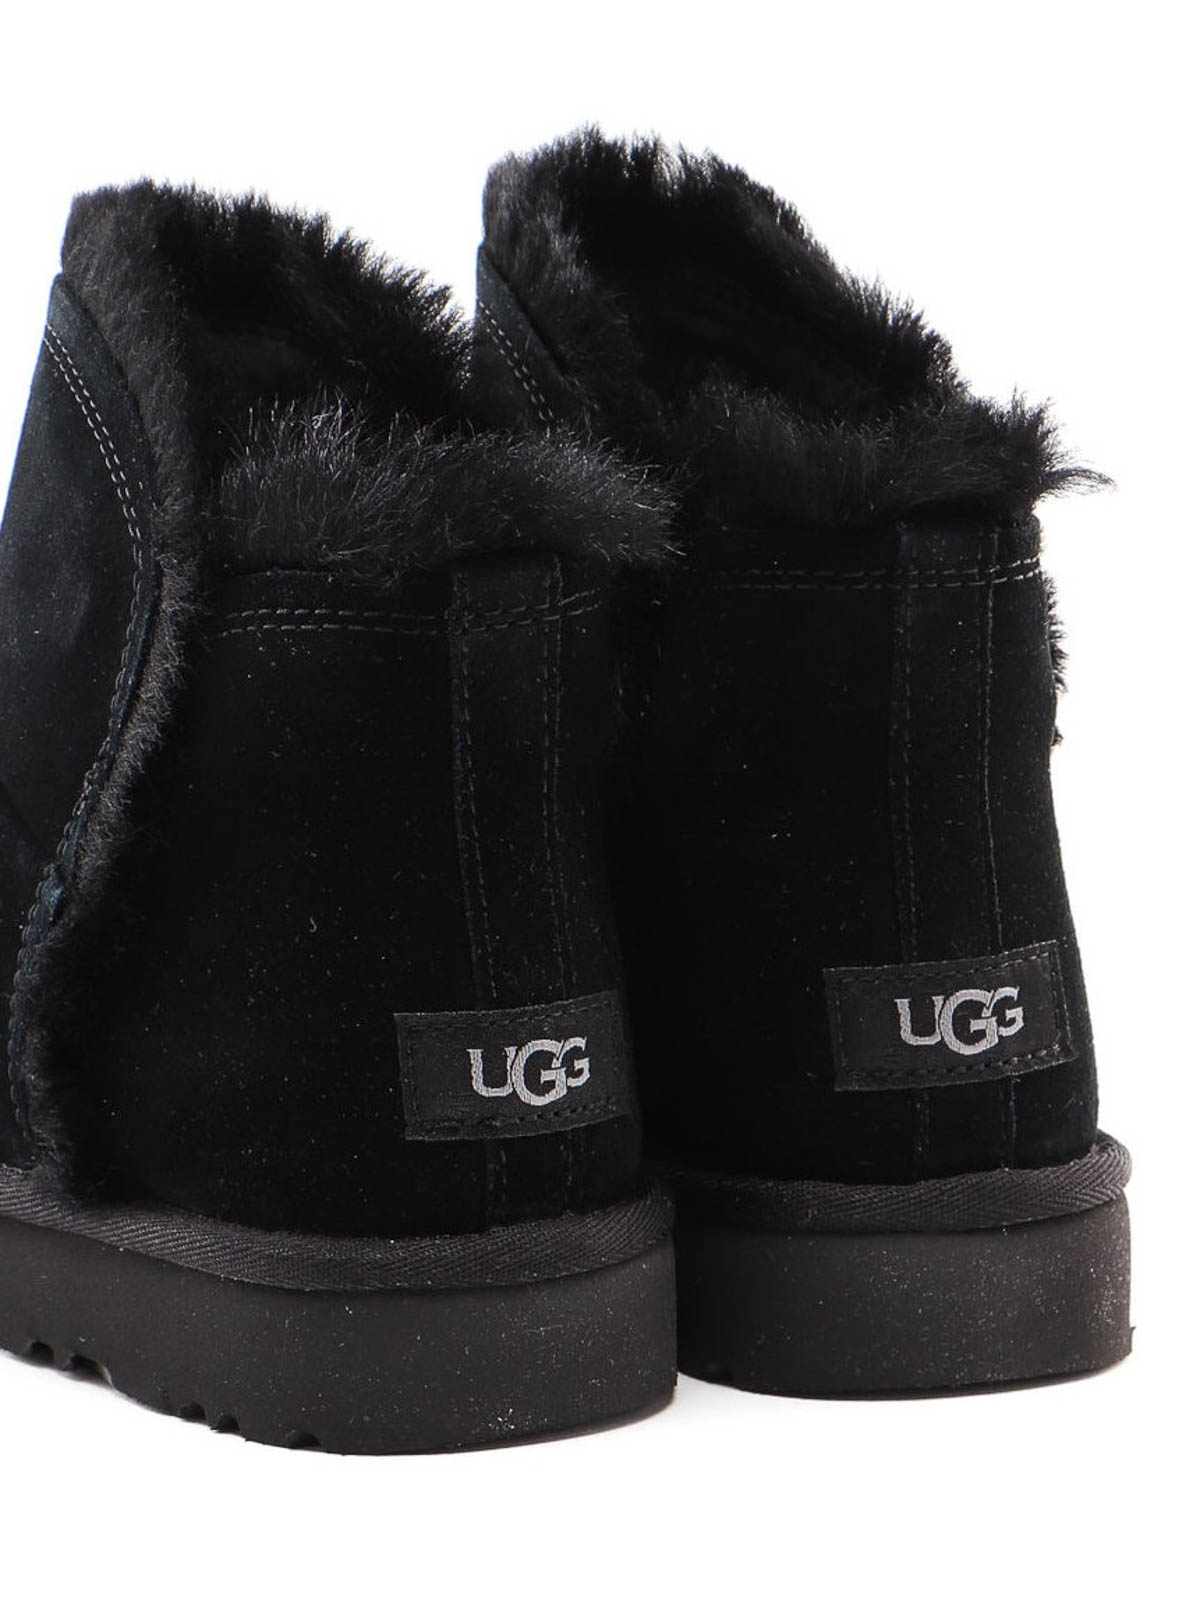 low top ugg boots